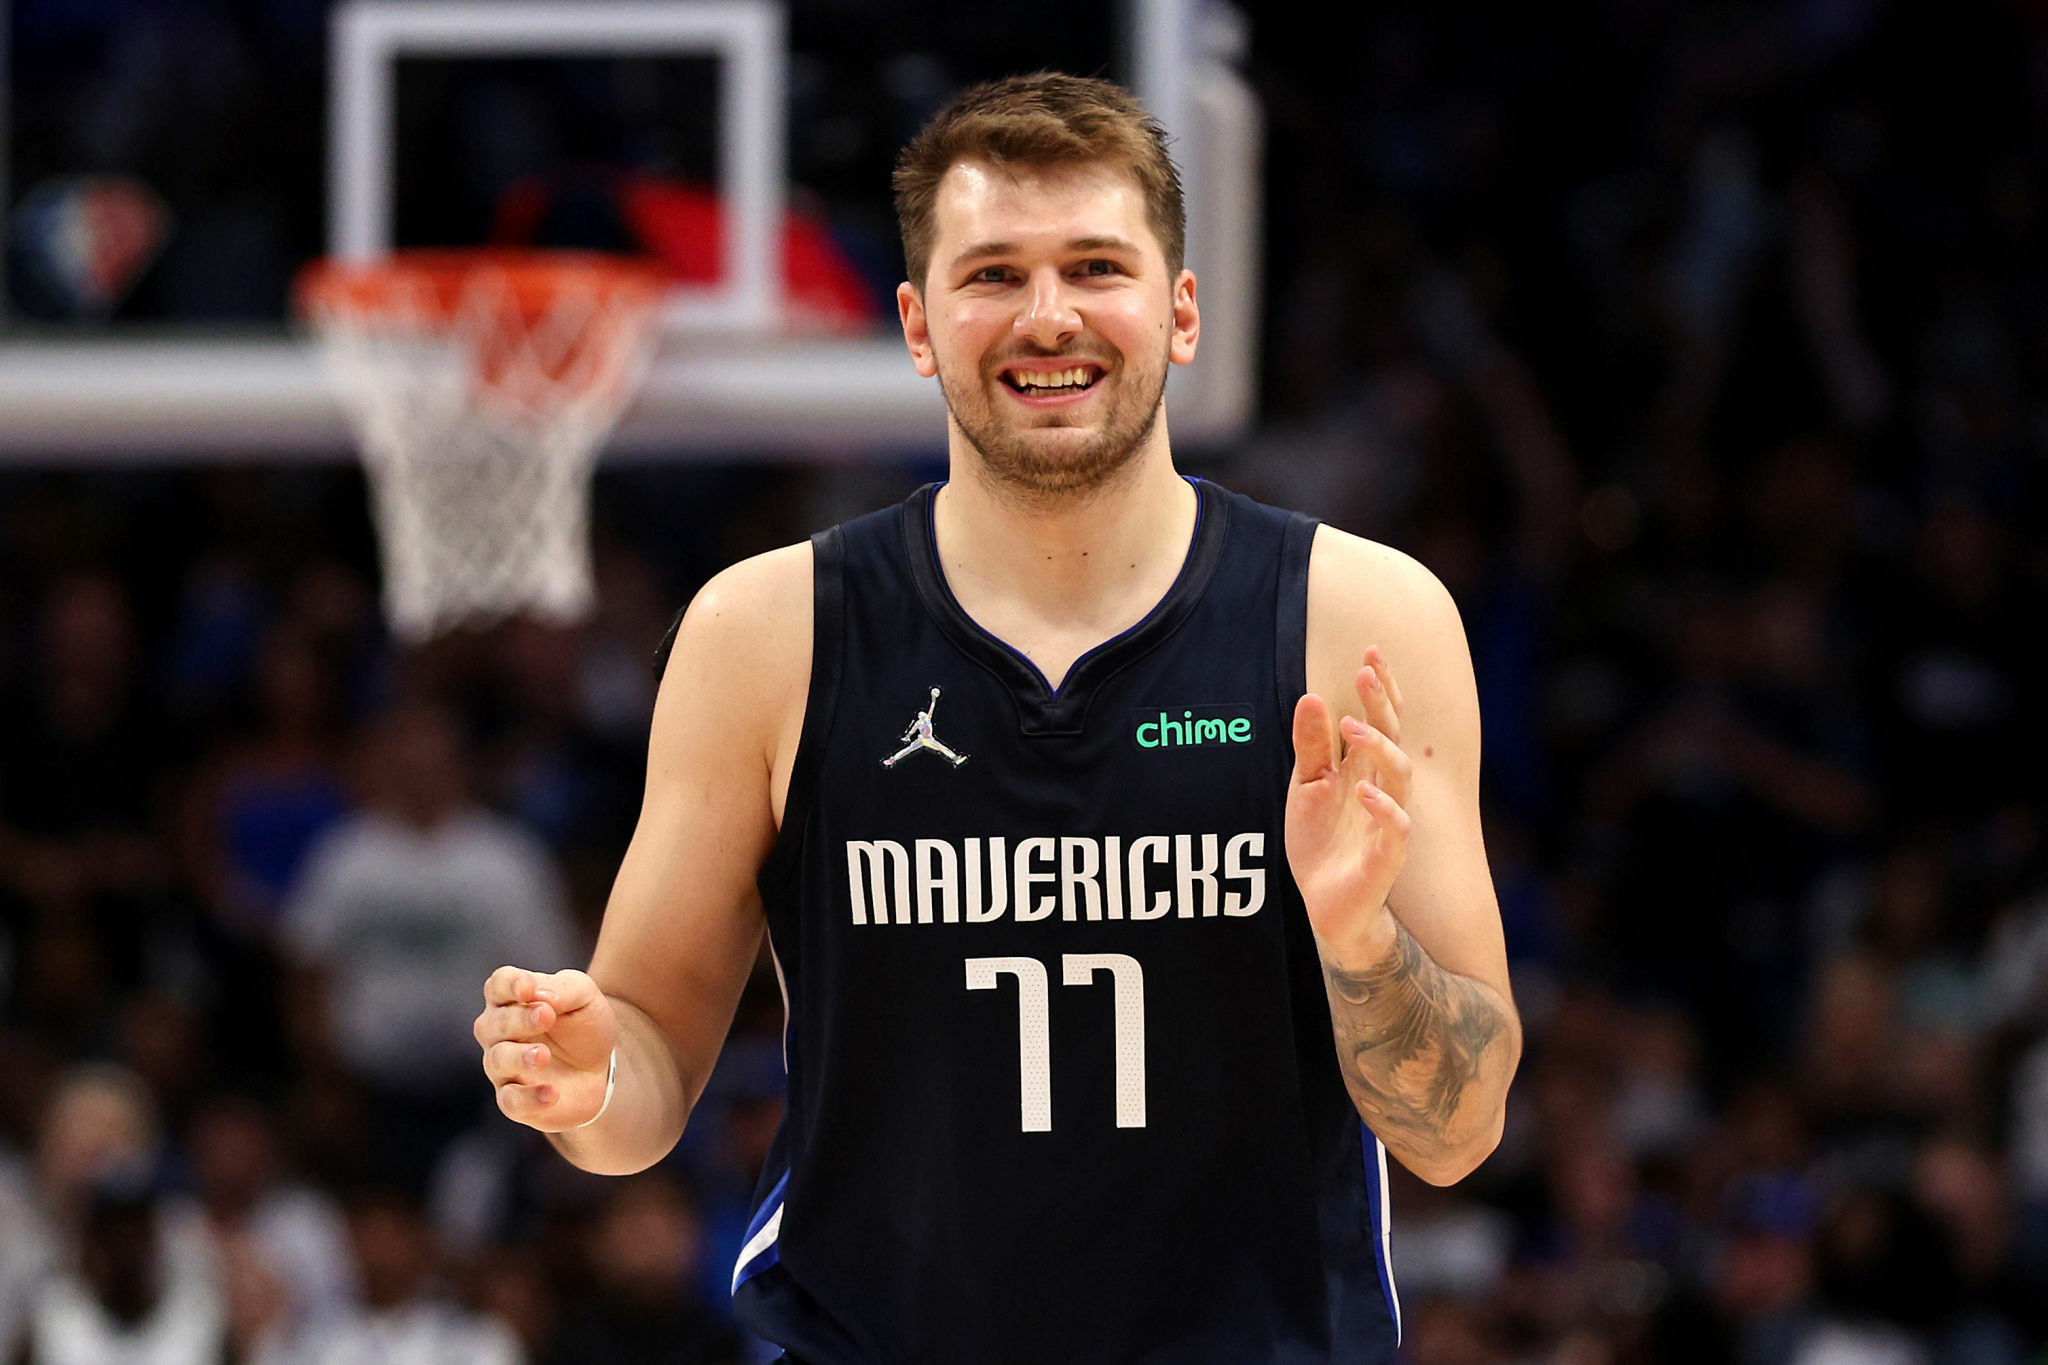 70+ Luka Dončić HD Wallpapers and Backgrounds